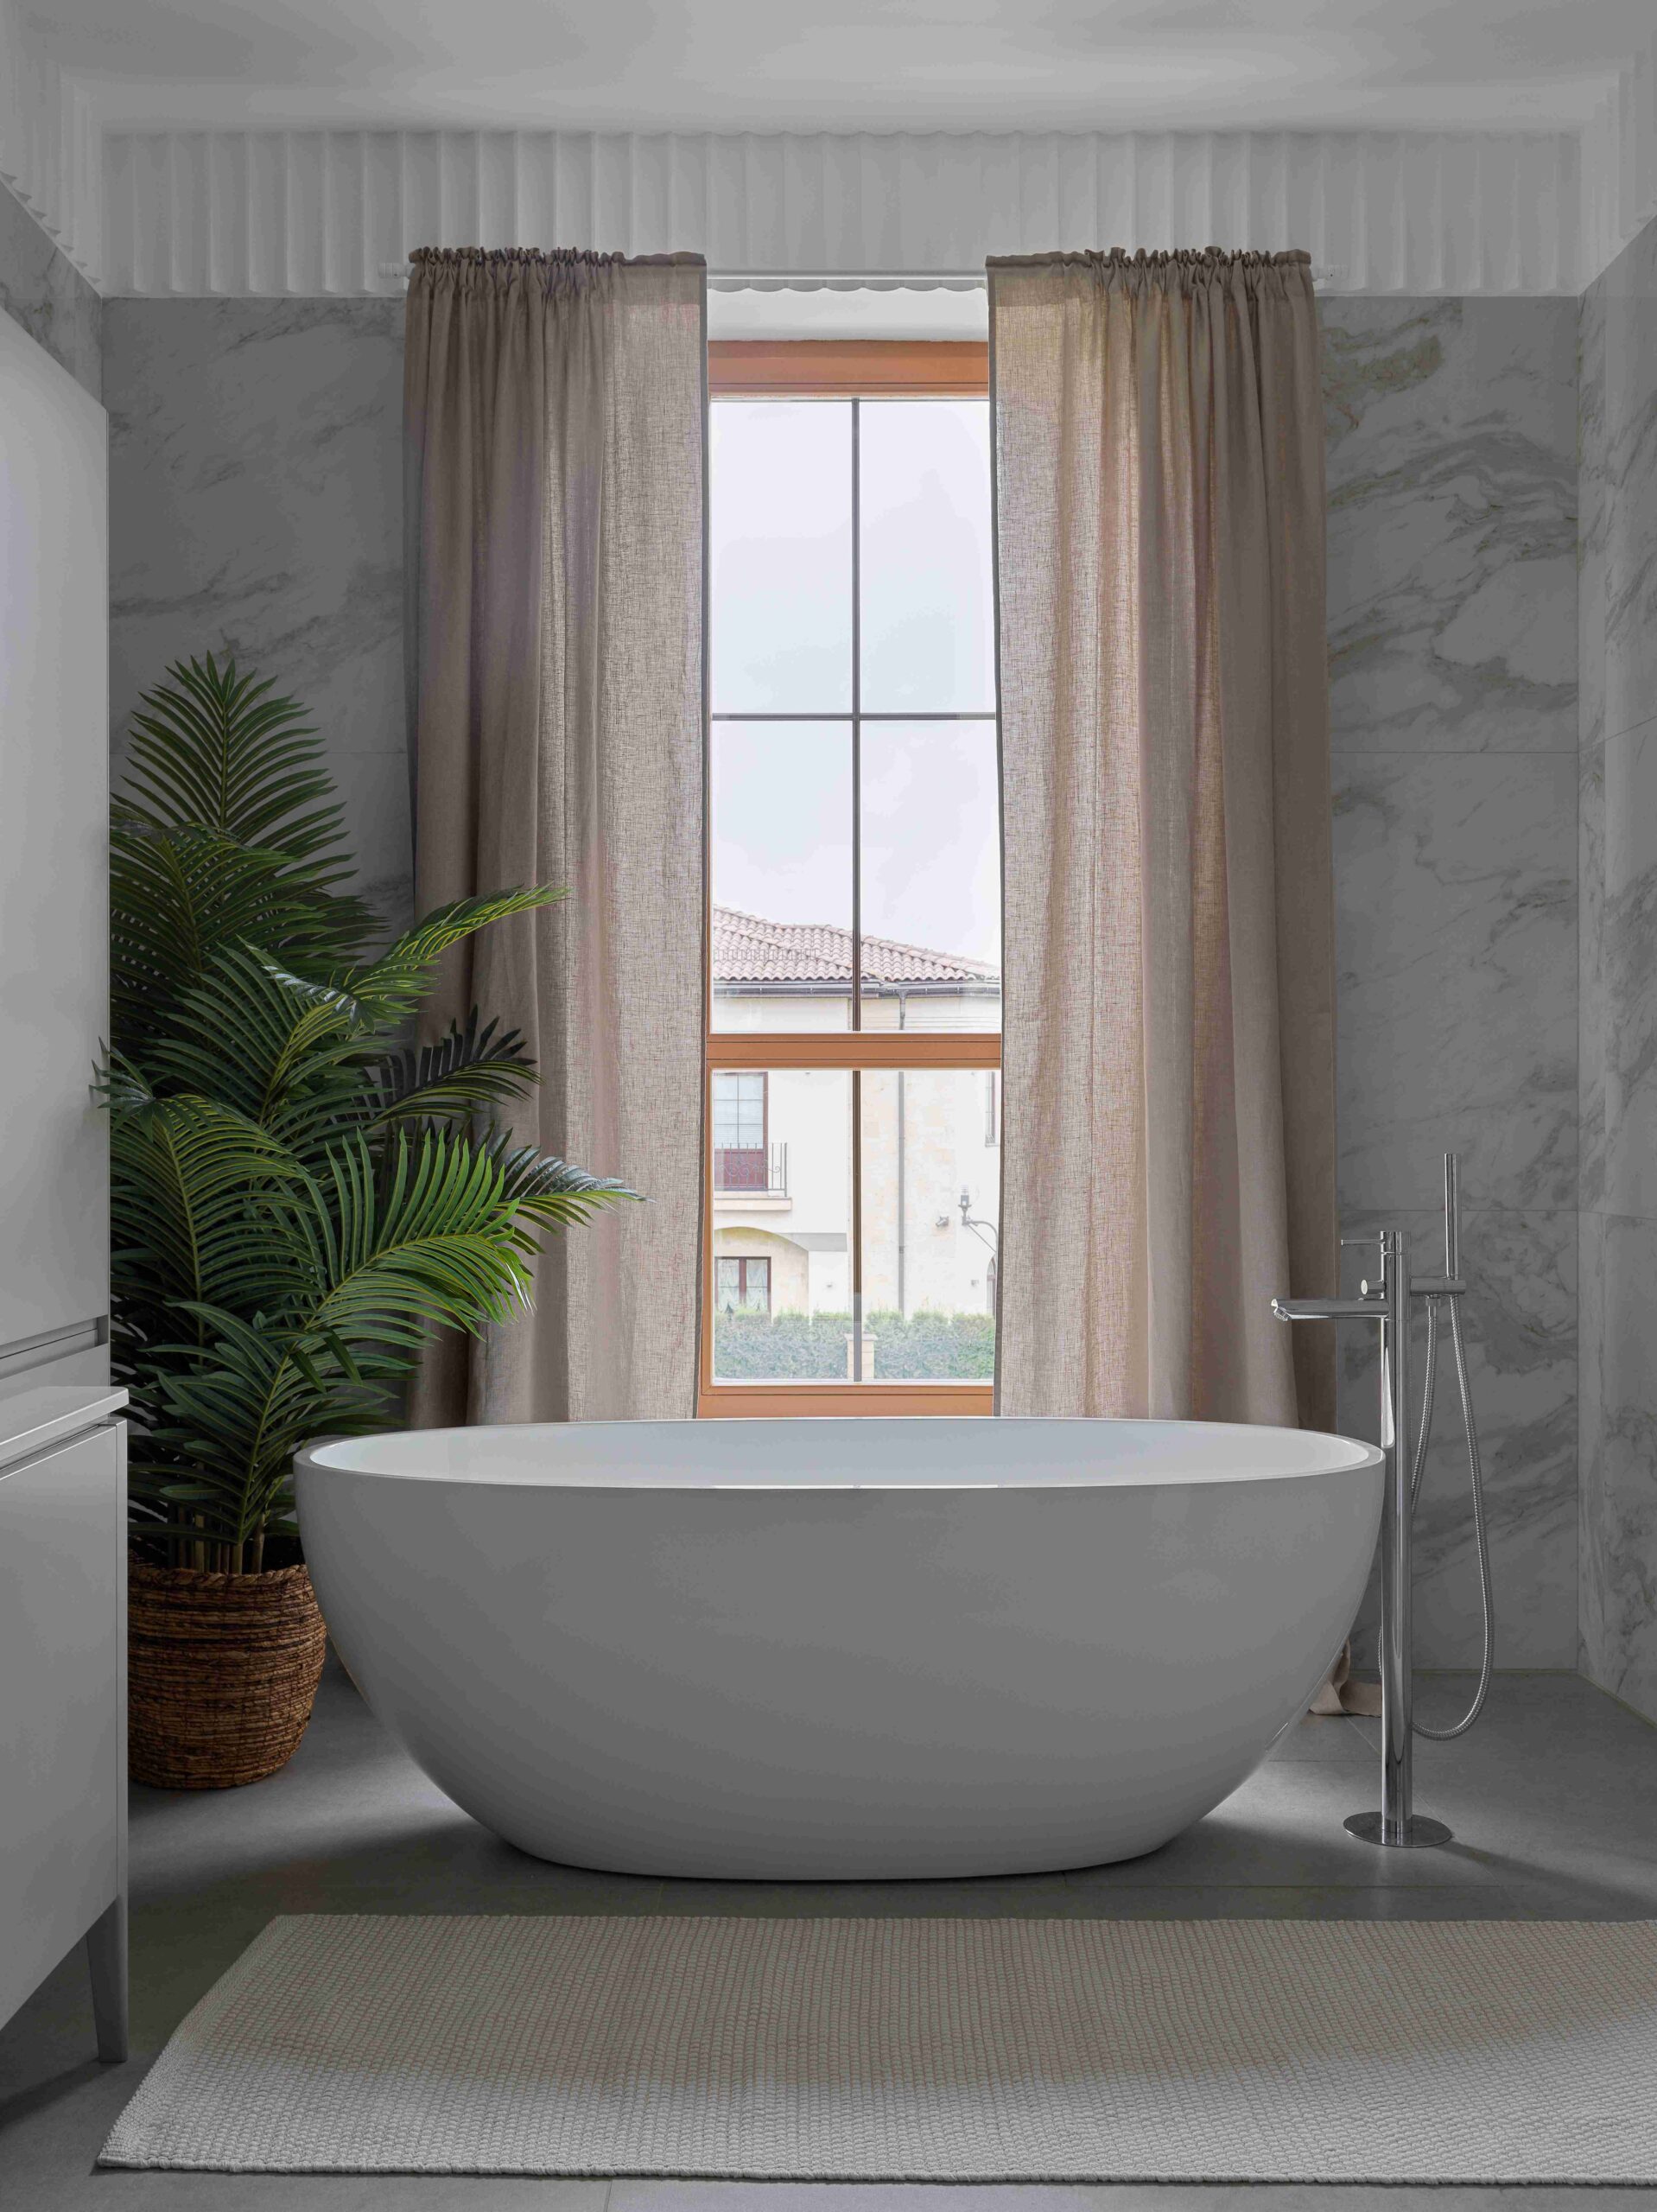 A luxurious freestanding bath tub against a floor to celiing window.